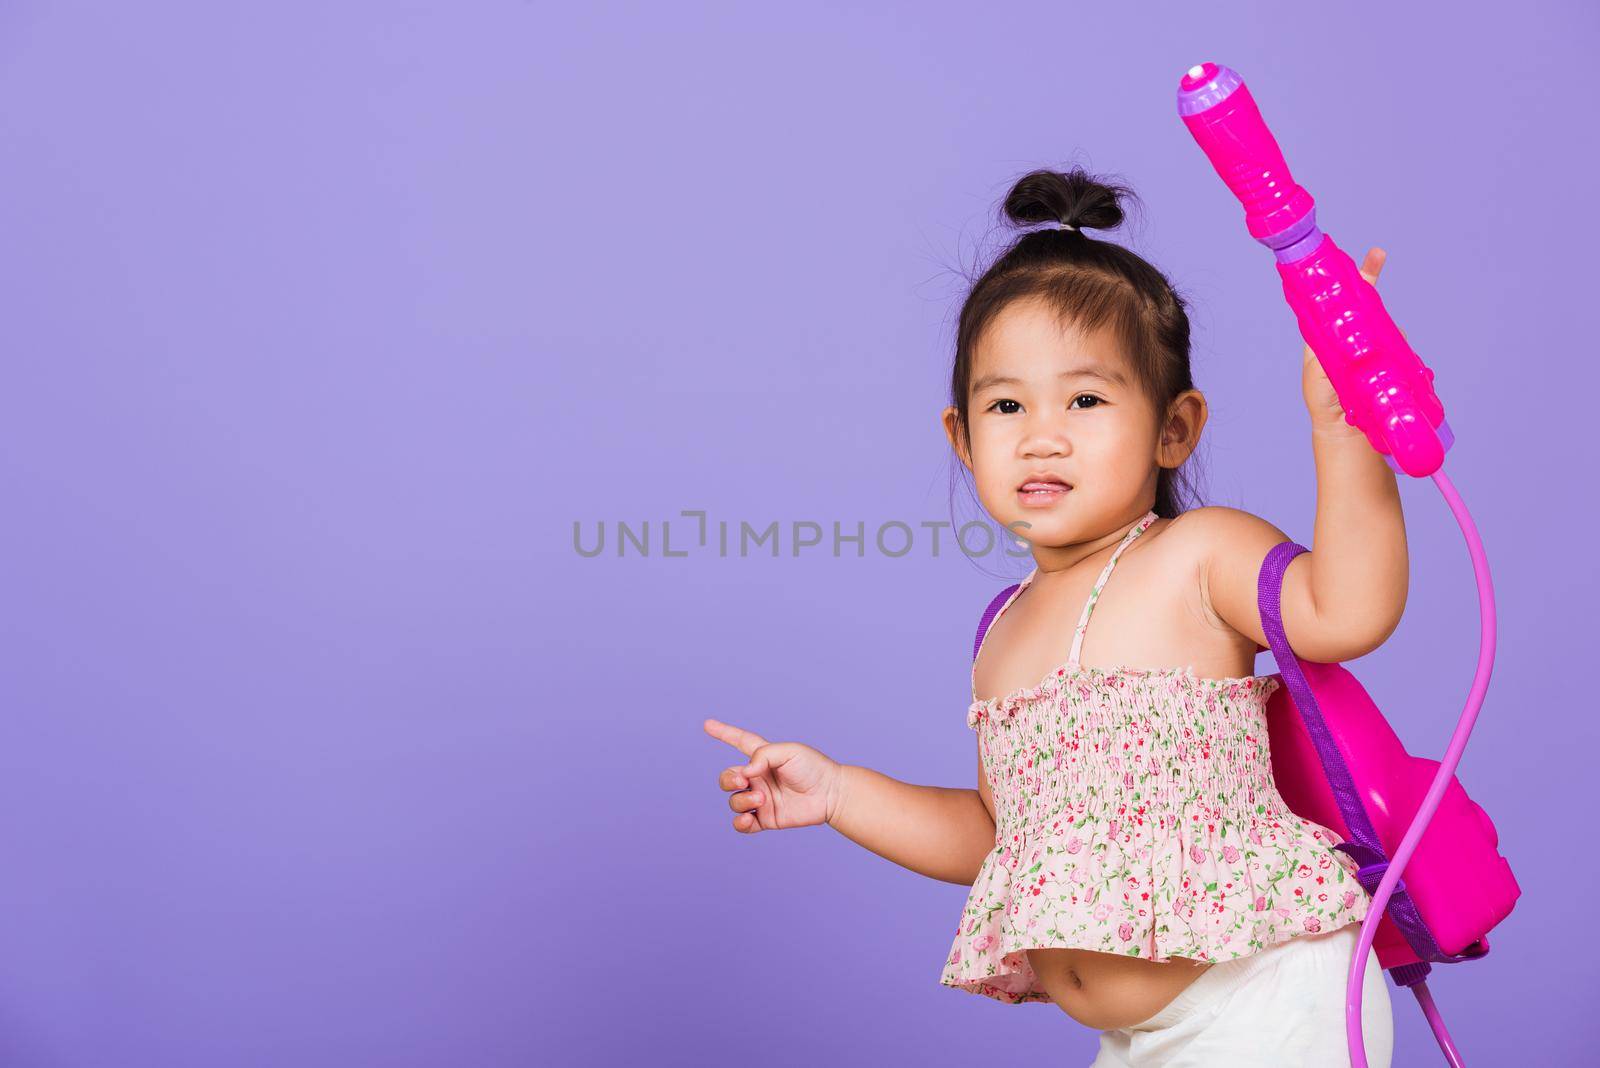 Thai child funny hold toy water pistol and smile, Happy Asian little girl holding plastic water gun, studio shot isolated on purple background, Thailand Songkran festival day national culture concept